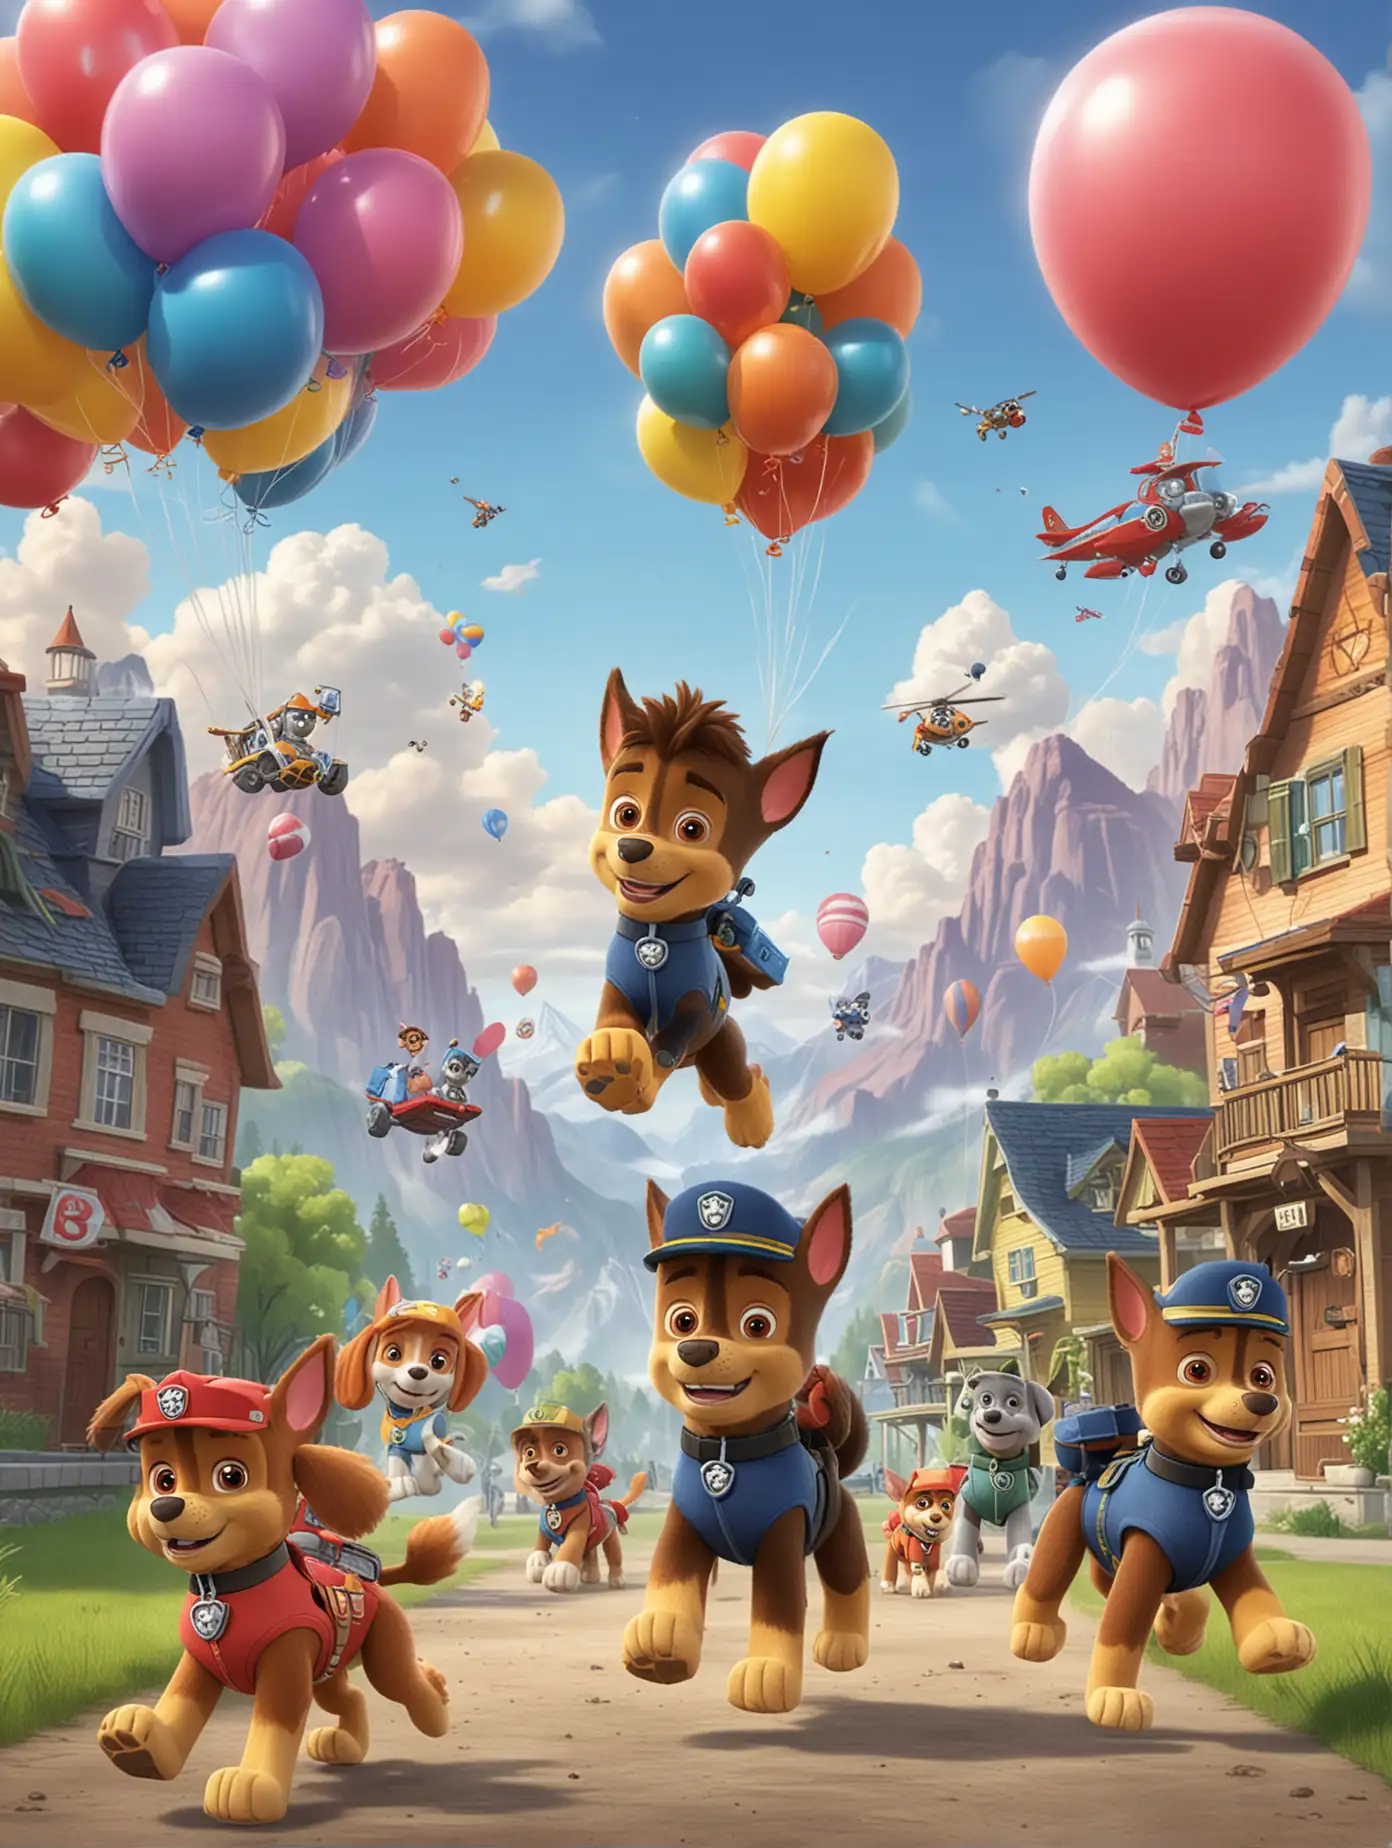 Paw Patrol Scene with Colorful Balloons